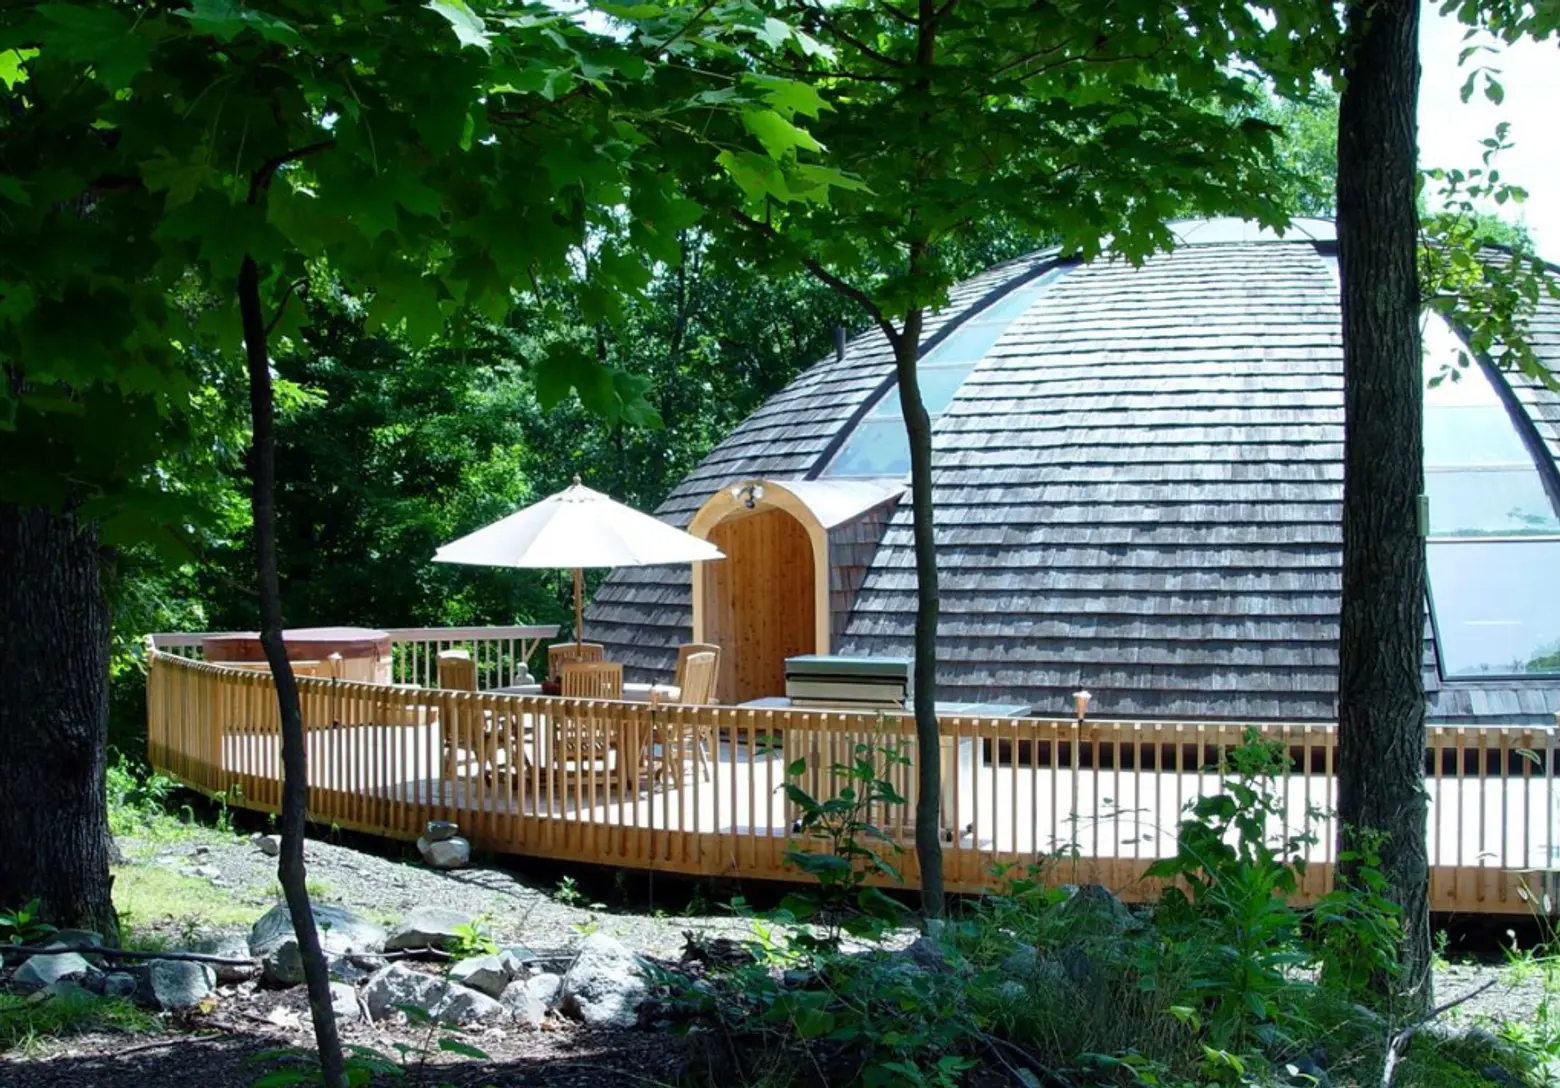 Domespaces - Affordable Housing - Domes For Sale